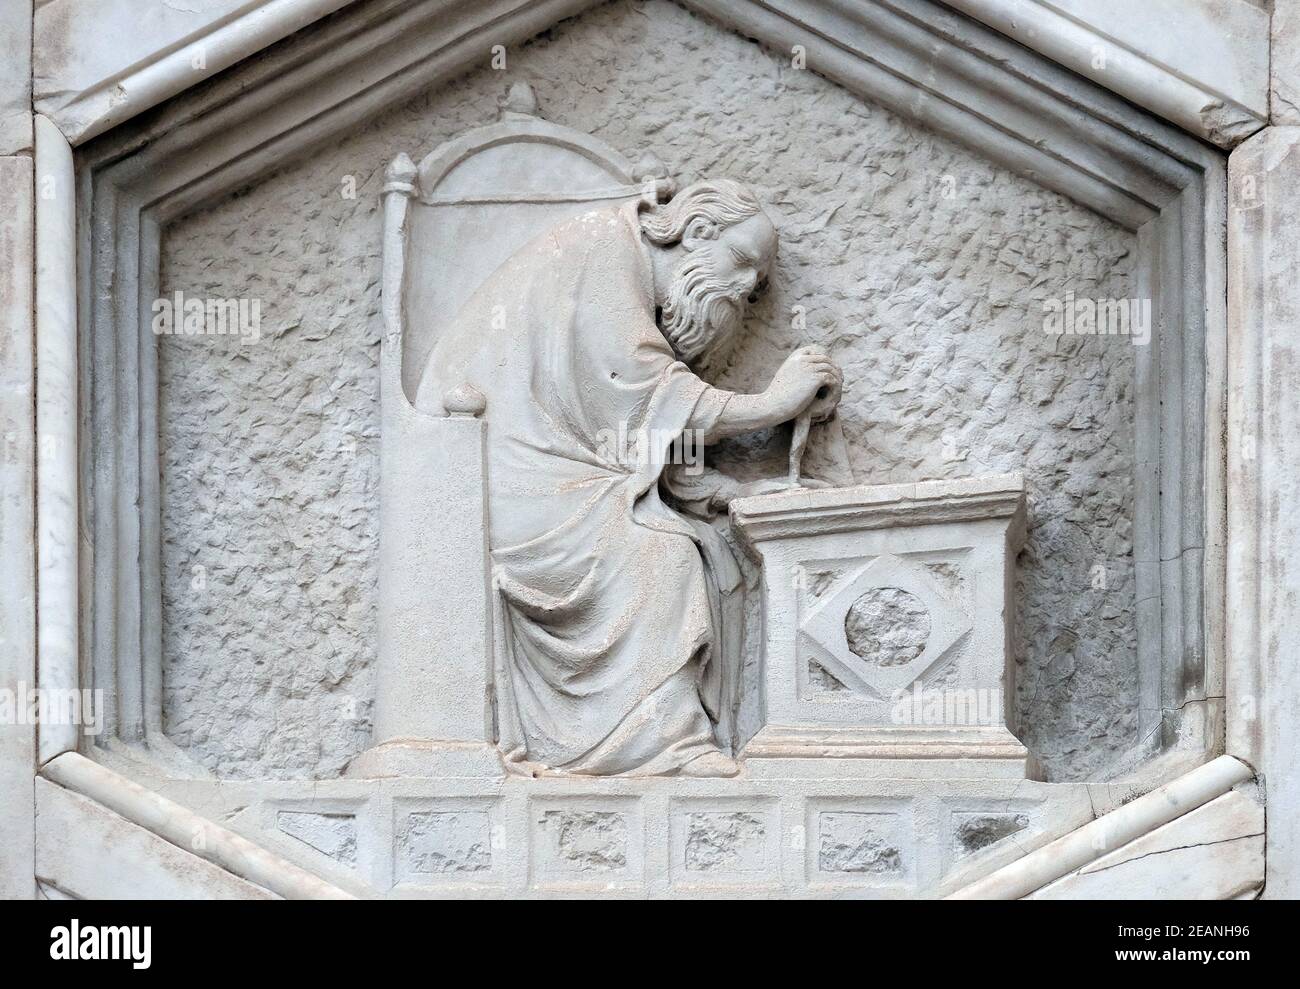 Allegory of architecture from the workshop of Pisano, Relief on Giotto Campanile of Cattedrale di Santa Maria del Fiore (Cathedral of Saint Mary of the Flower), Florence, Italy Stock Photo